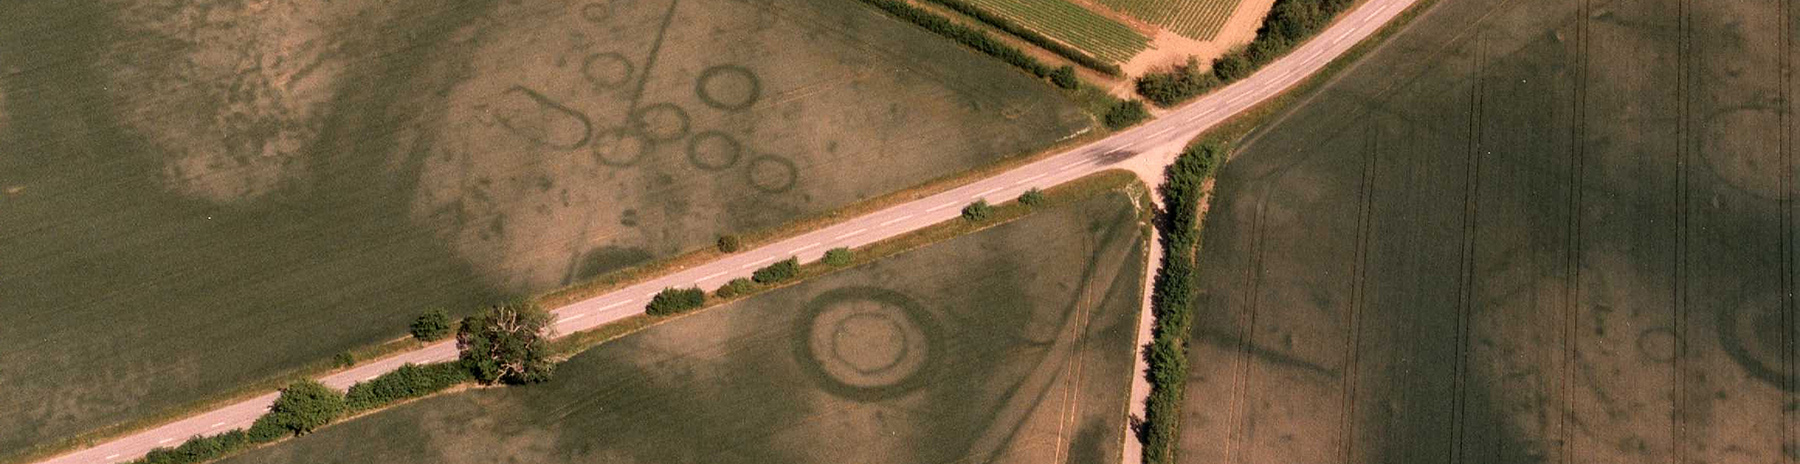 aerial photo of cropmarks showing ring ditches and trackway